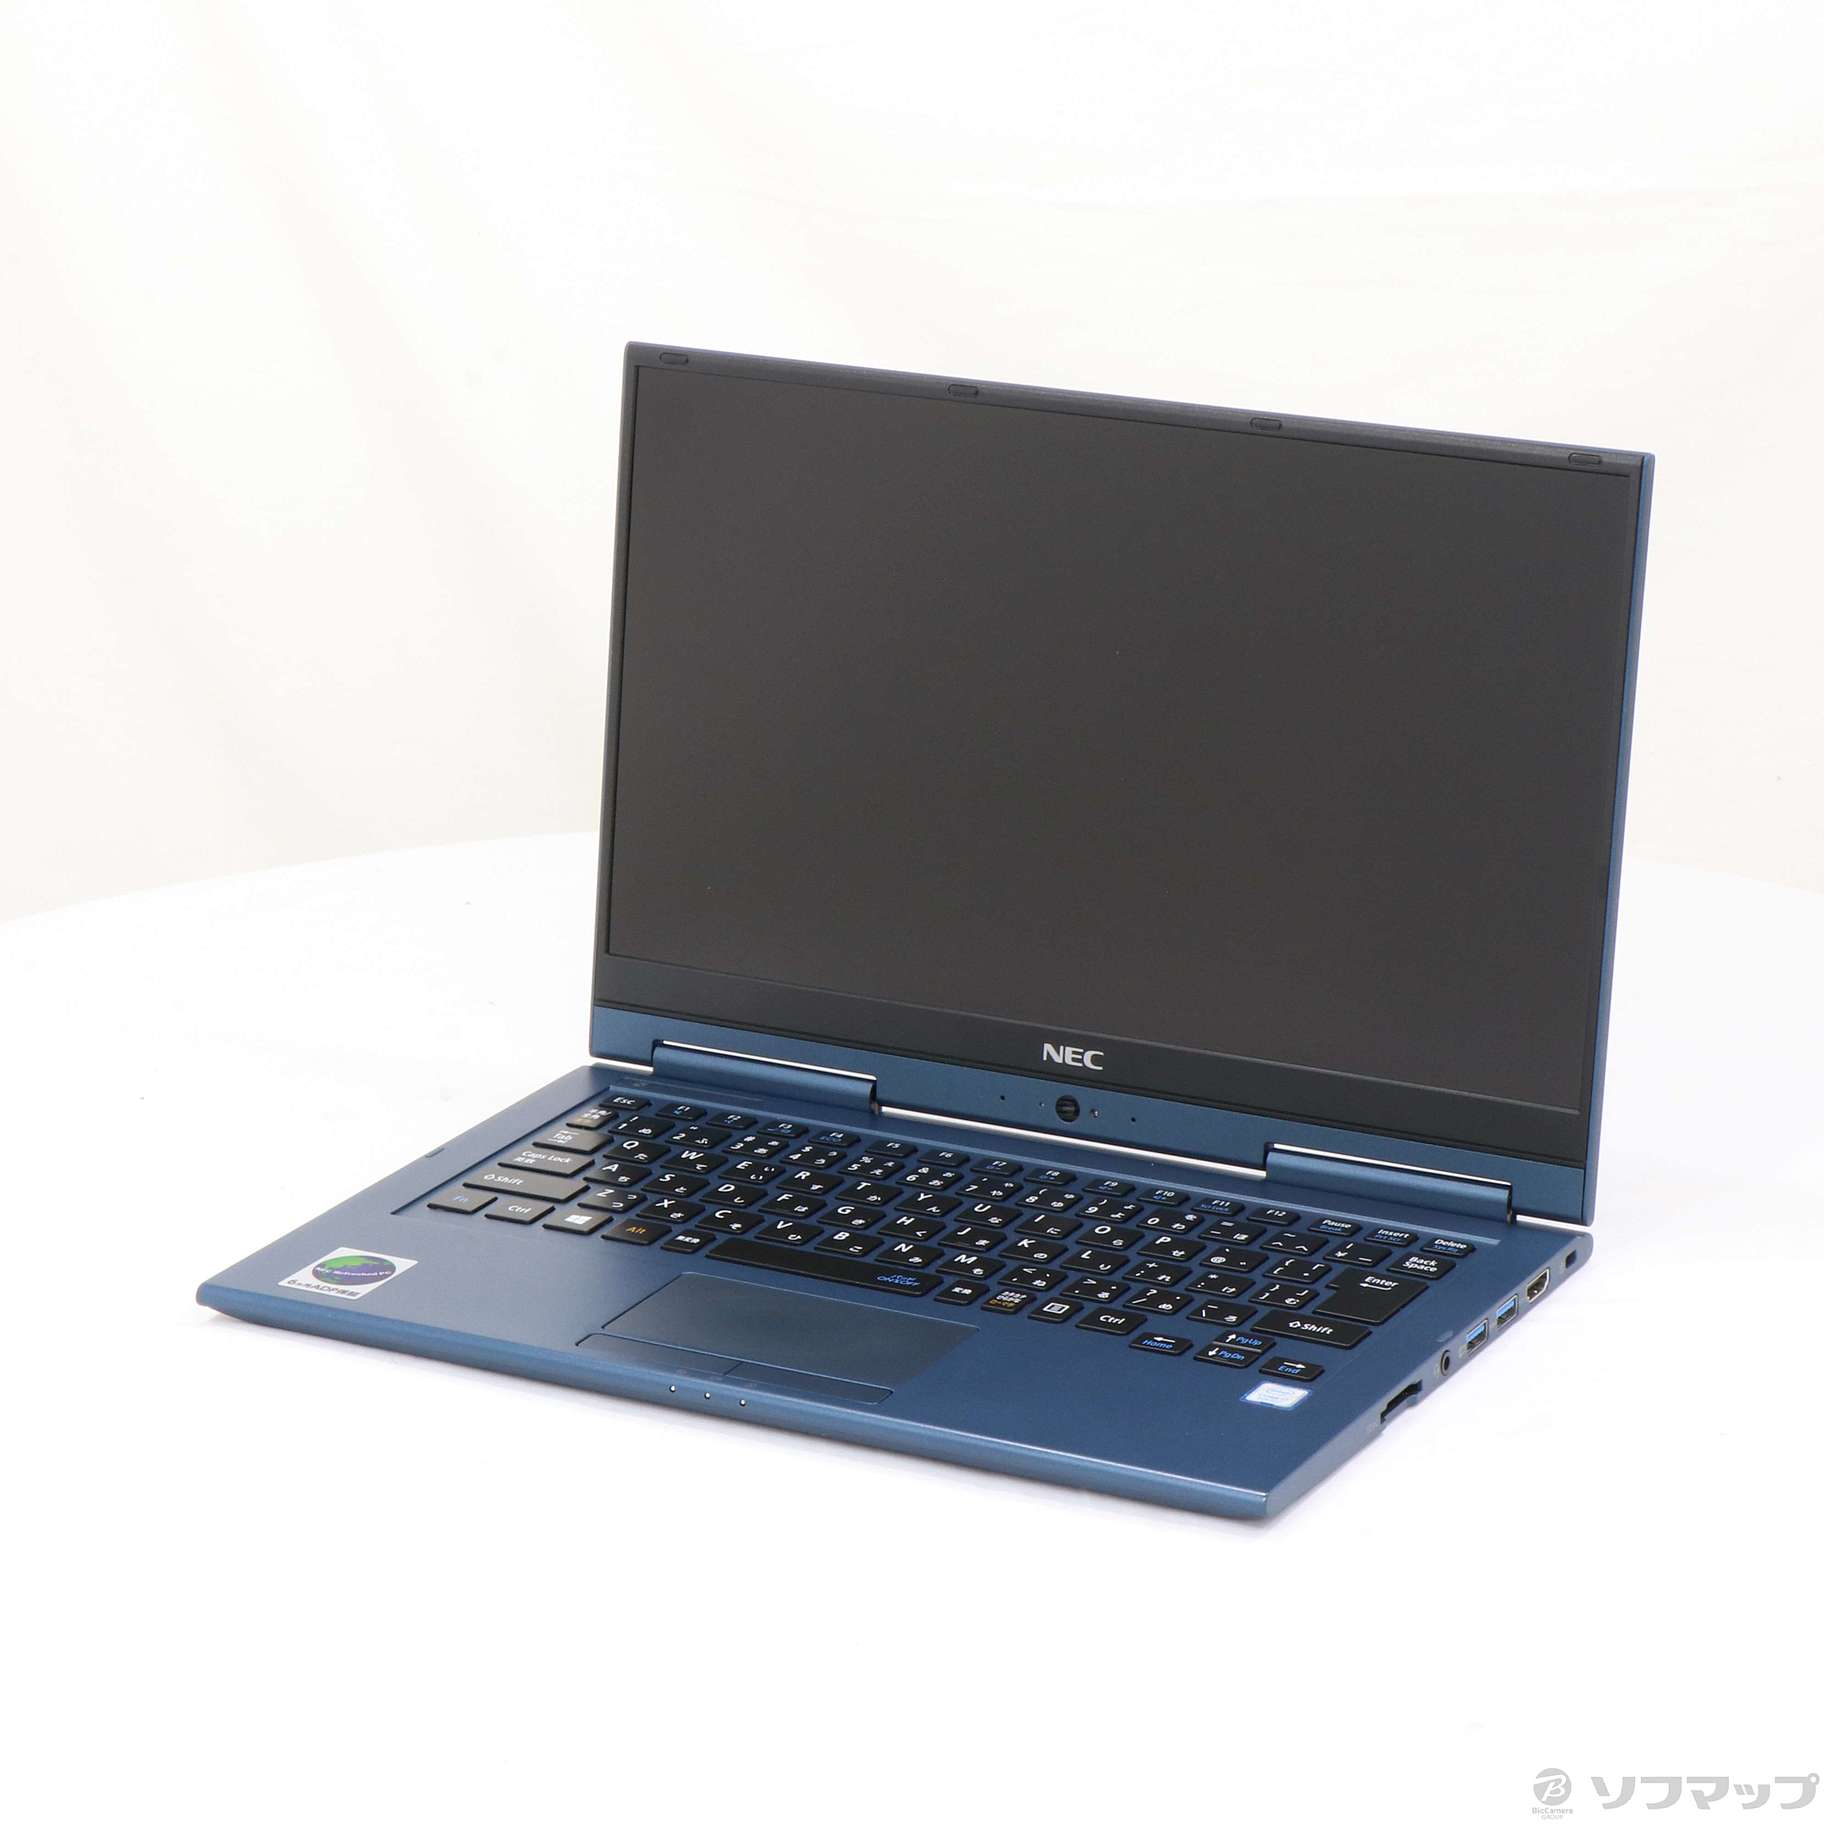 LAVIE Direct HZ PC-GN18644AE 〔NEC Refreshed PC〕 〔Windows 10〕 〔Office付〕  ≪メーカー保証あり≫ ◇09/27(月)値下げ！